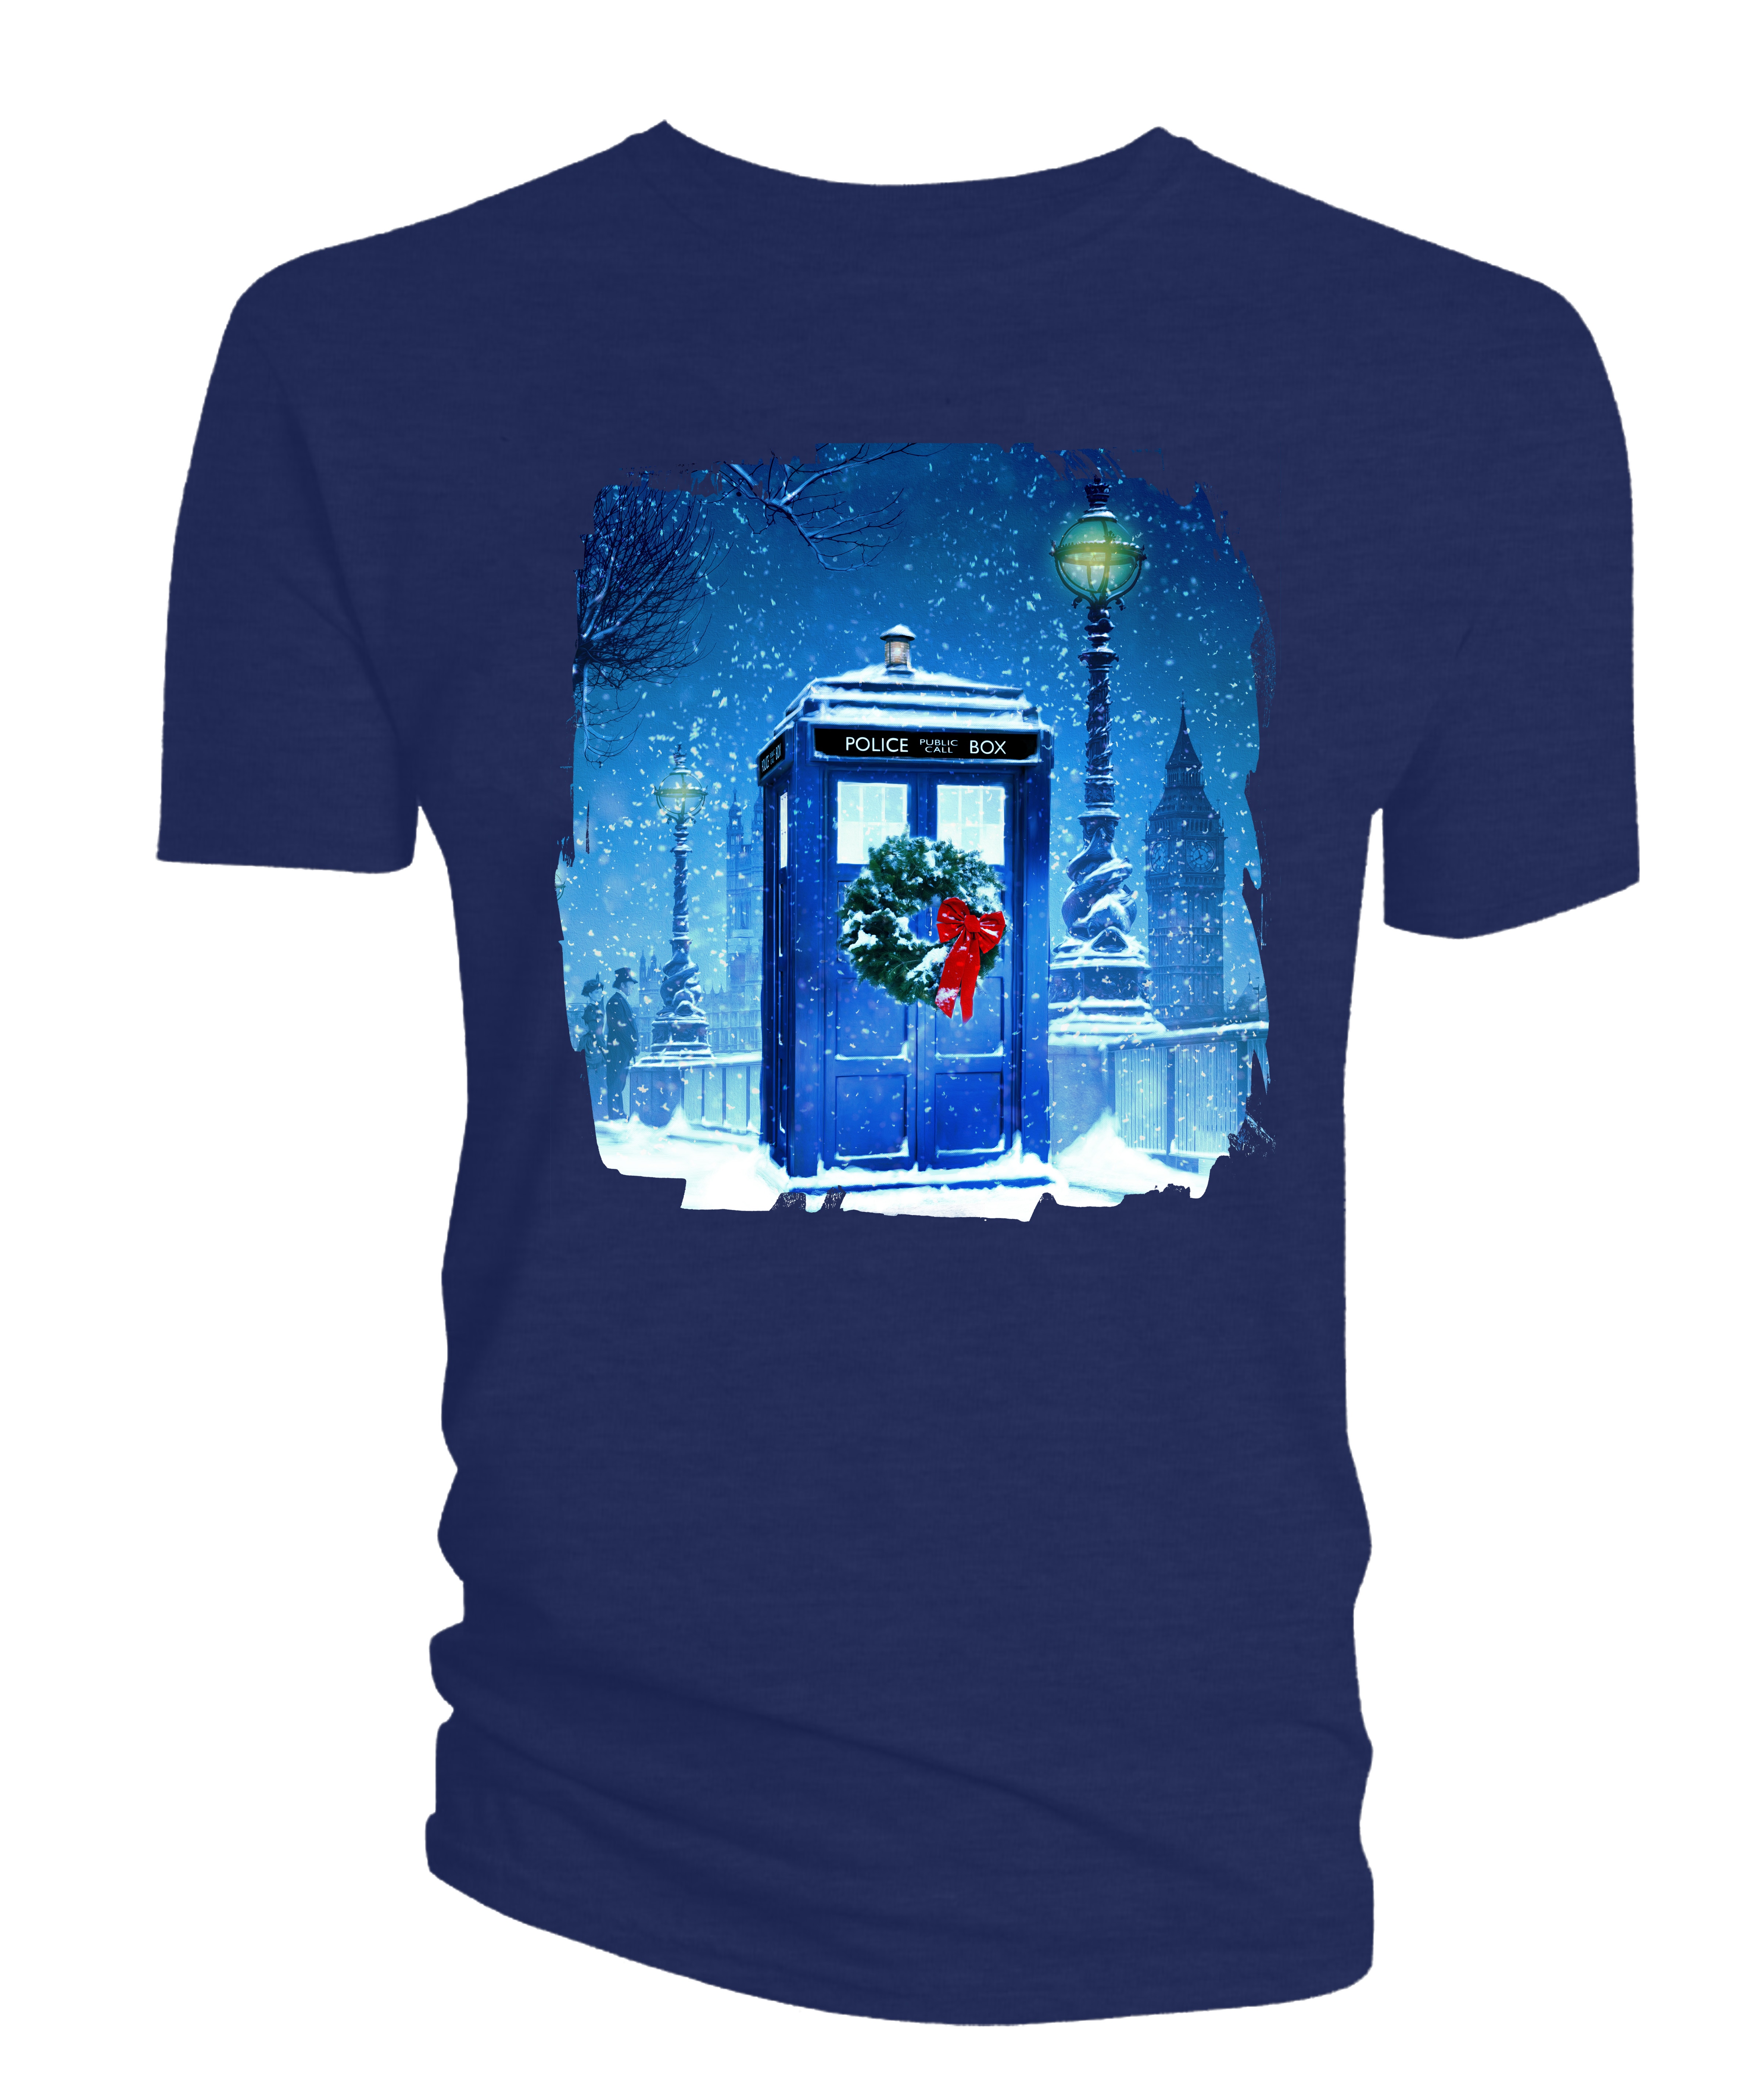 Image of blue t-shirt with the TARDIS on the front in a snowy setting with a Christmas wreath on the door